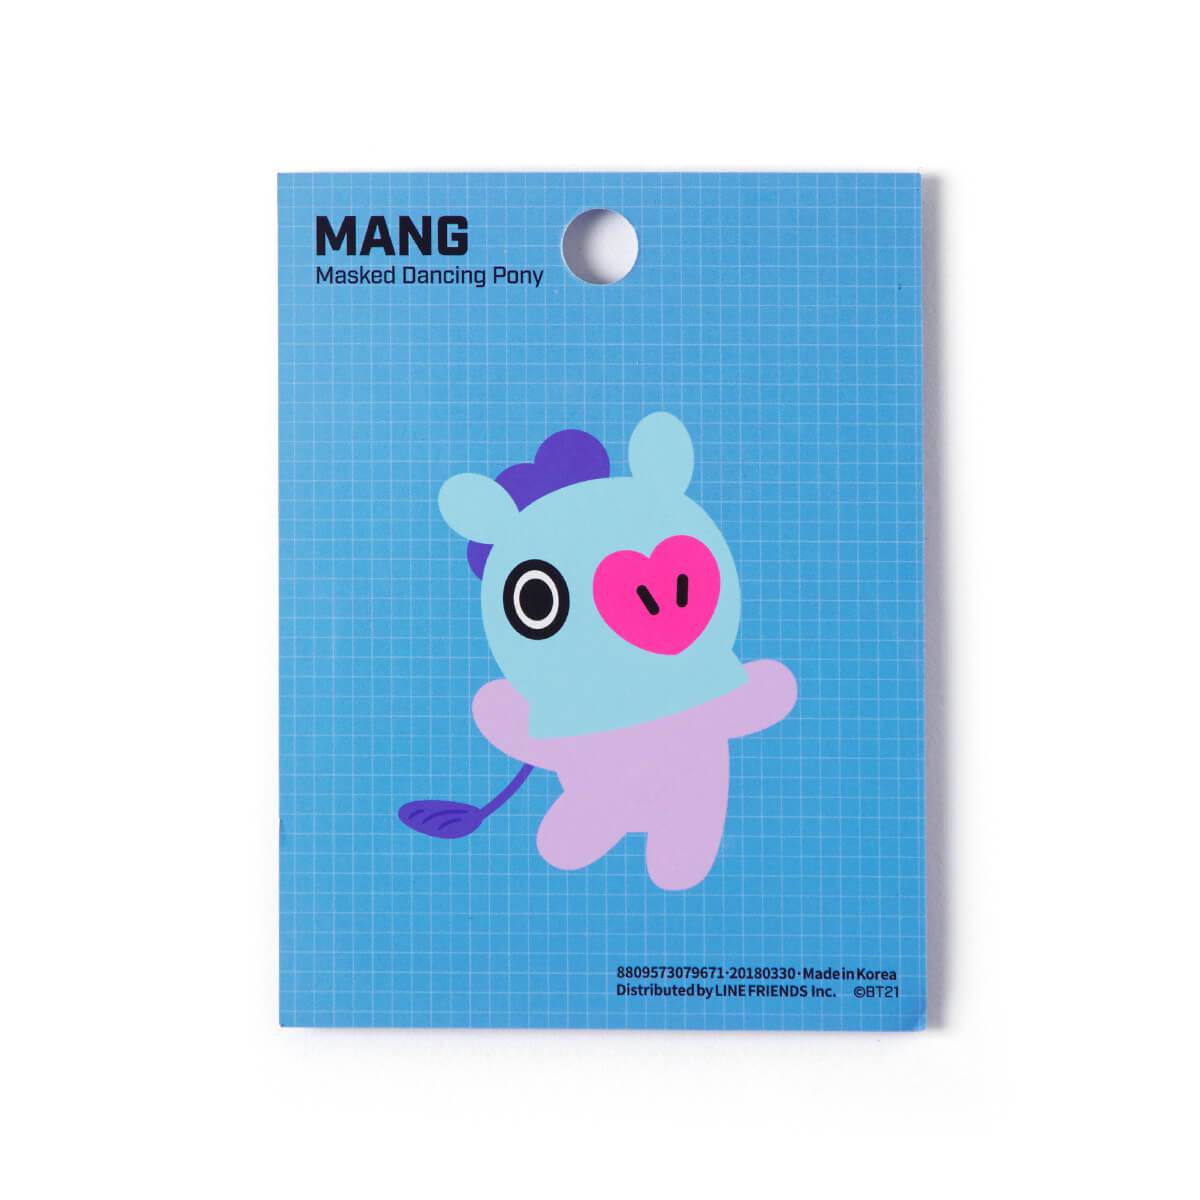 BT21 MANG Cute Sticky Notes